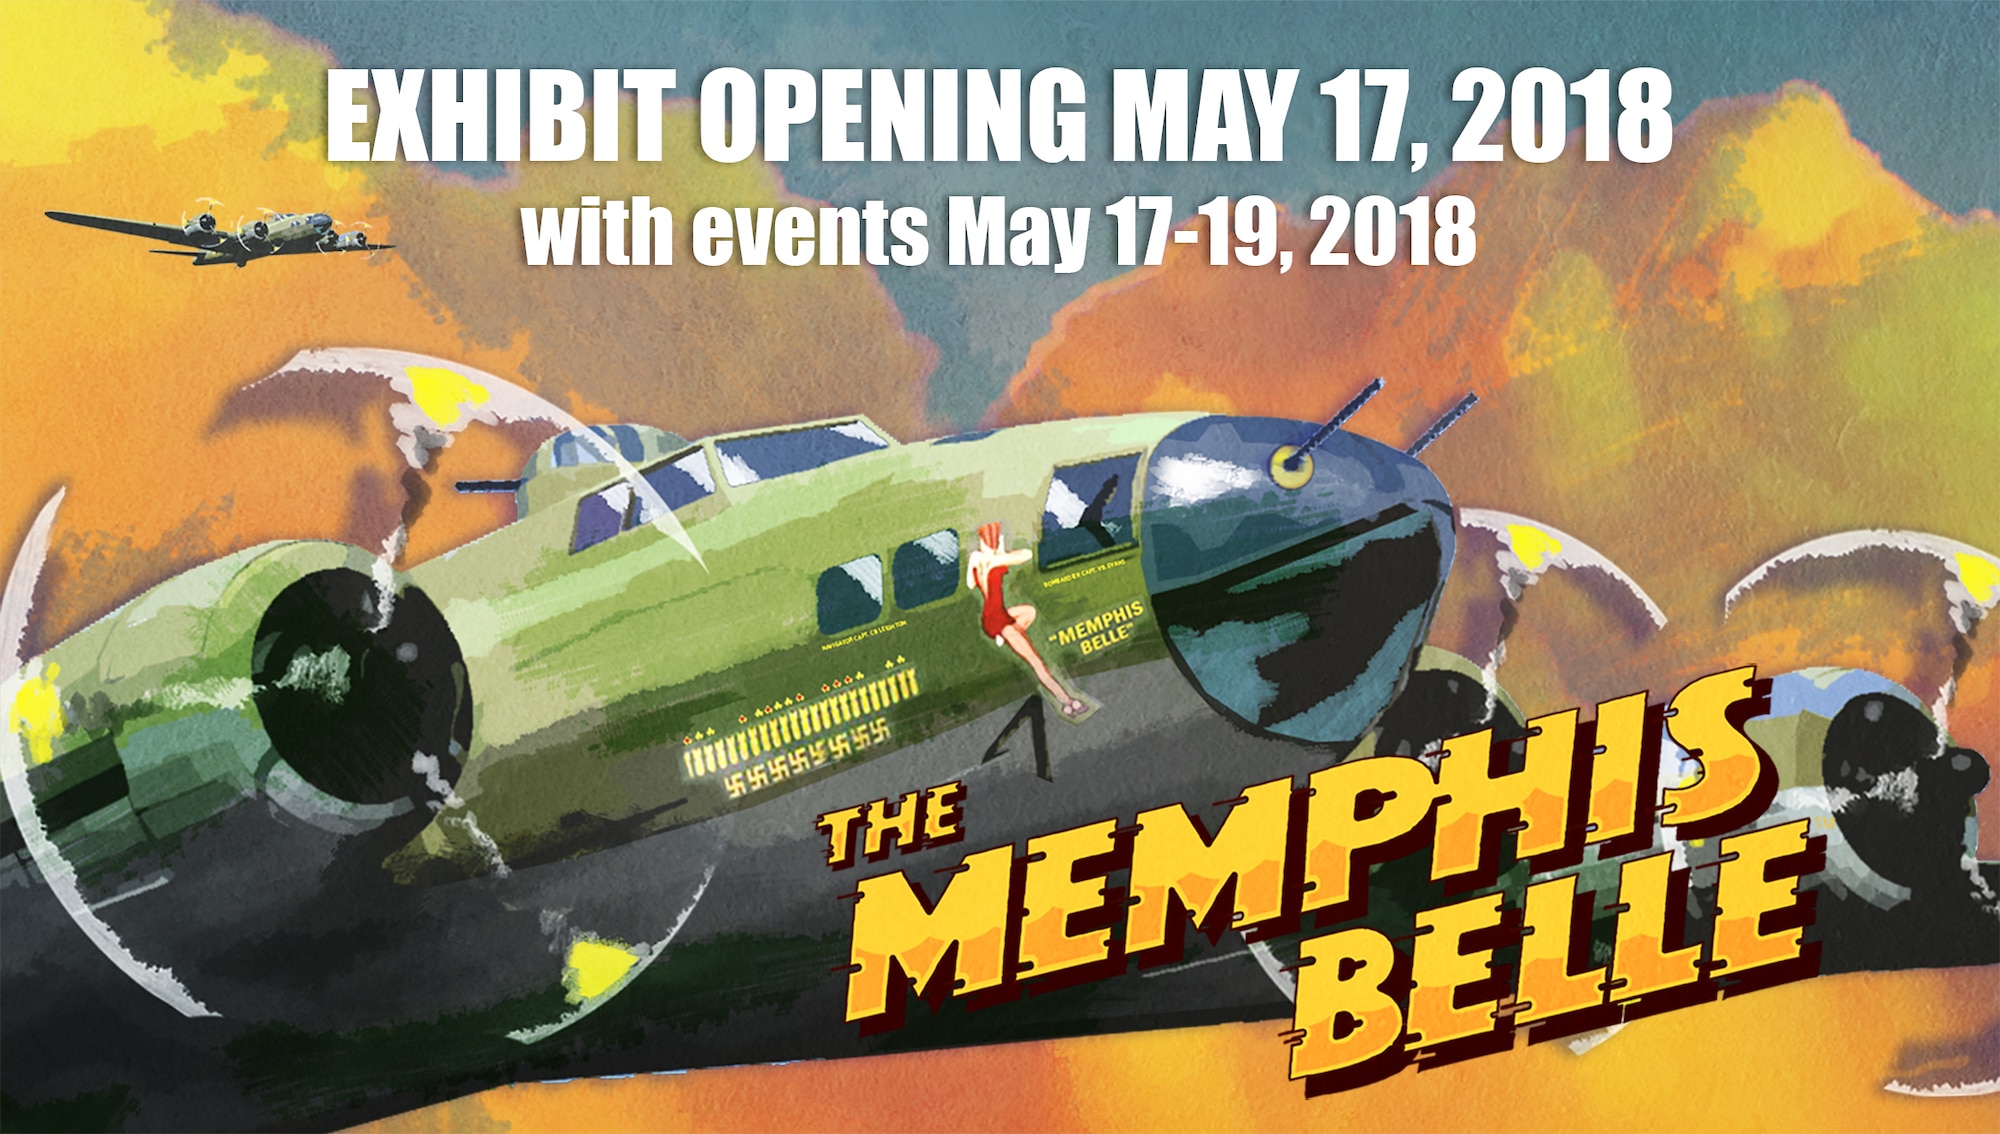 The B-17F Memphis Belle will be placed on permanent public display at the National Museum of the U.S. Air force on May 17 with celebratory events on May 17-19, 2018.